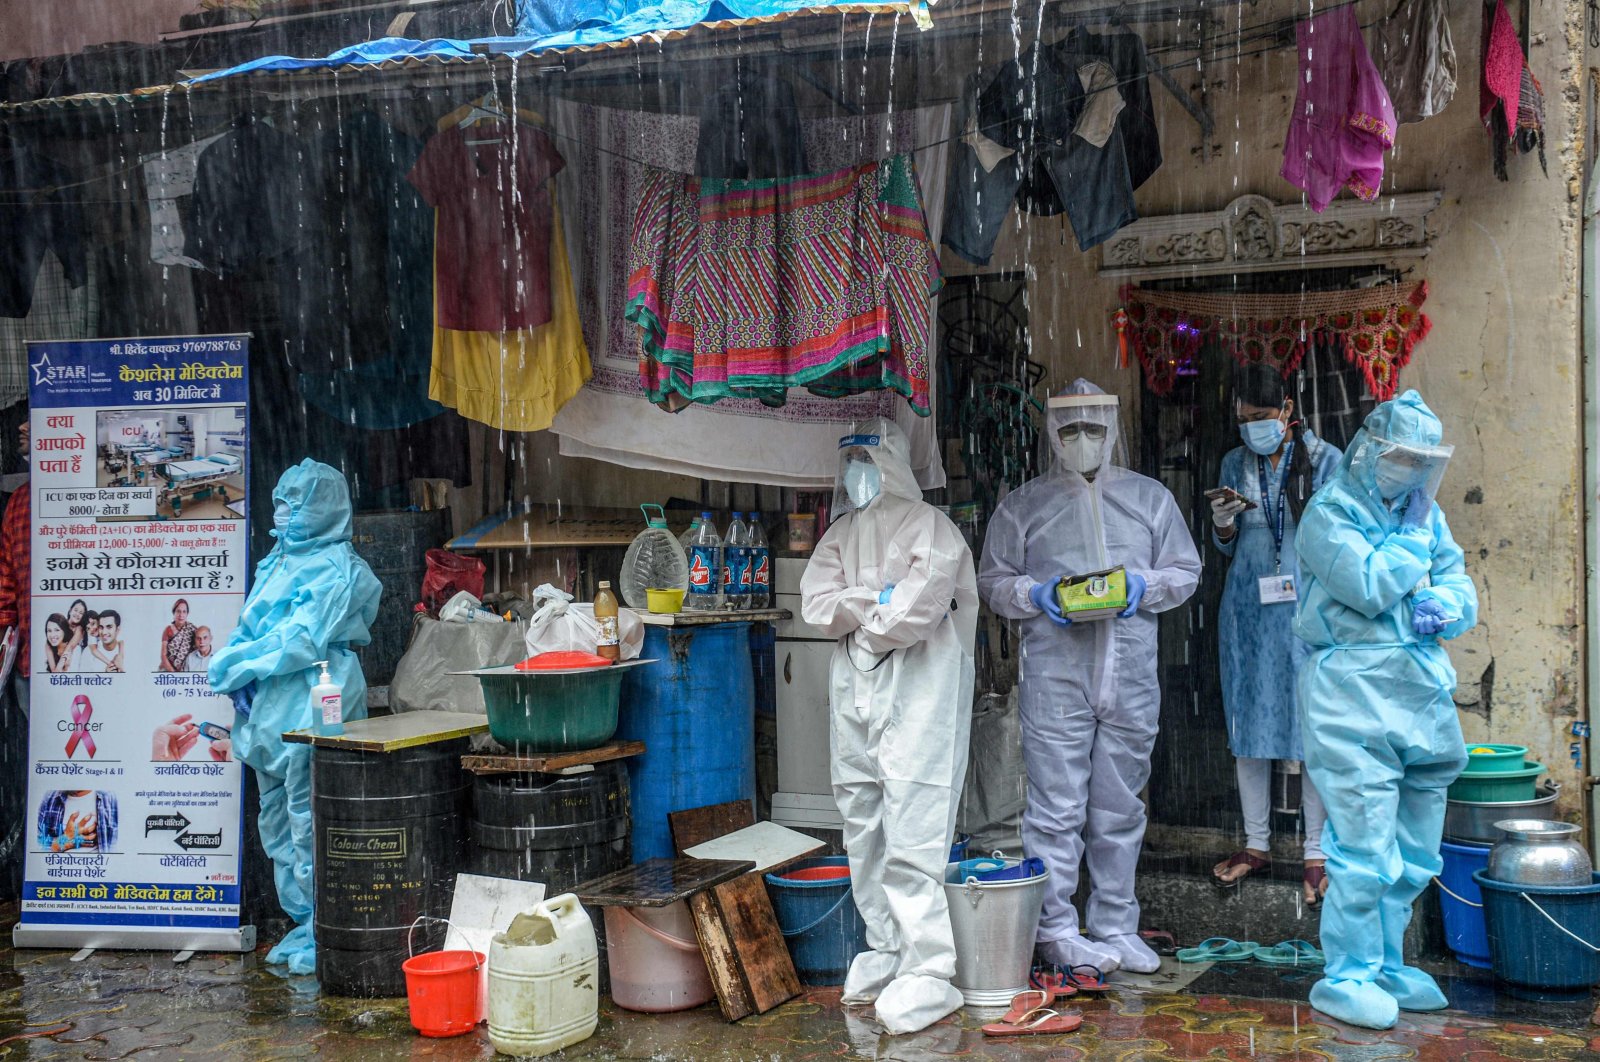 Health workers wearing personal protective equipment (PPE) suits take shelter while conducting a COVID-19 screening under heavy rain, Mumbai, India, Aug. 12, 2020. (AFP Photo)